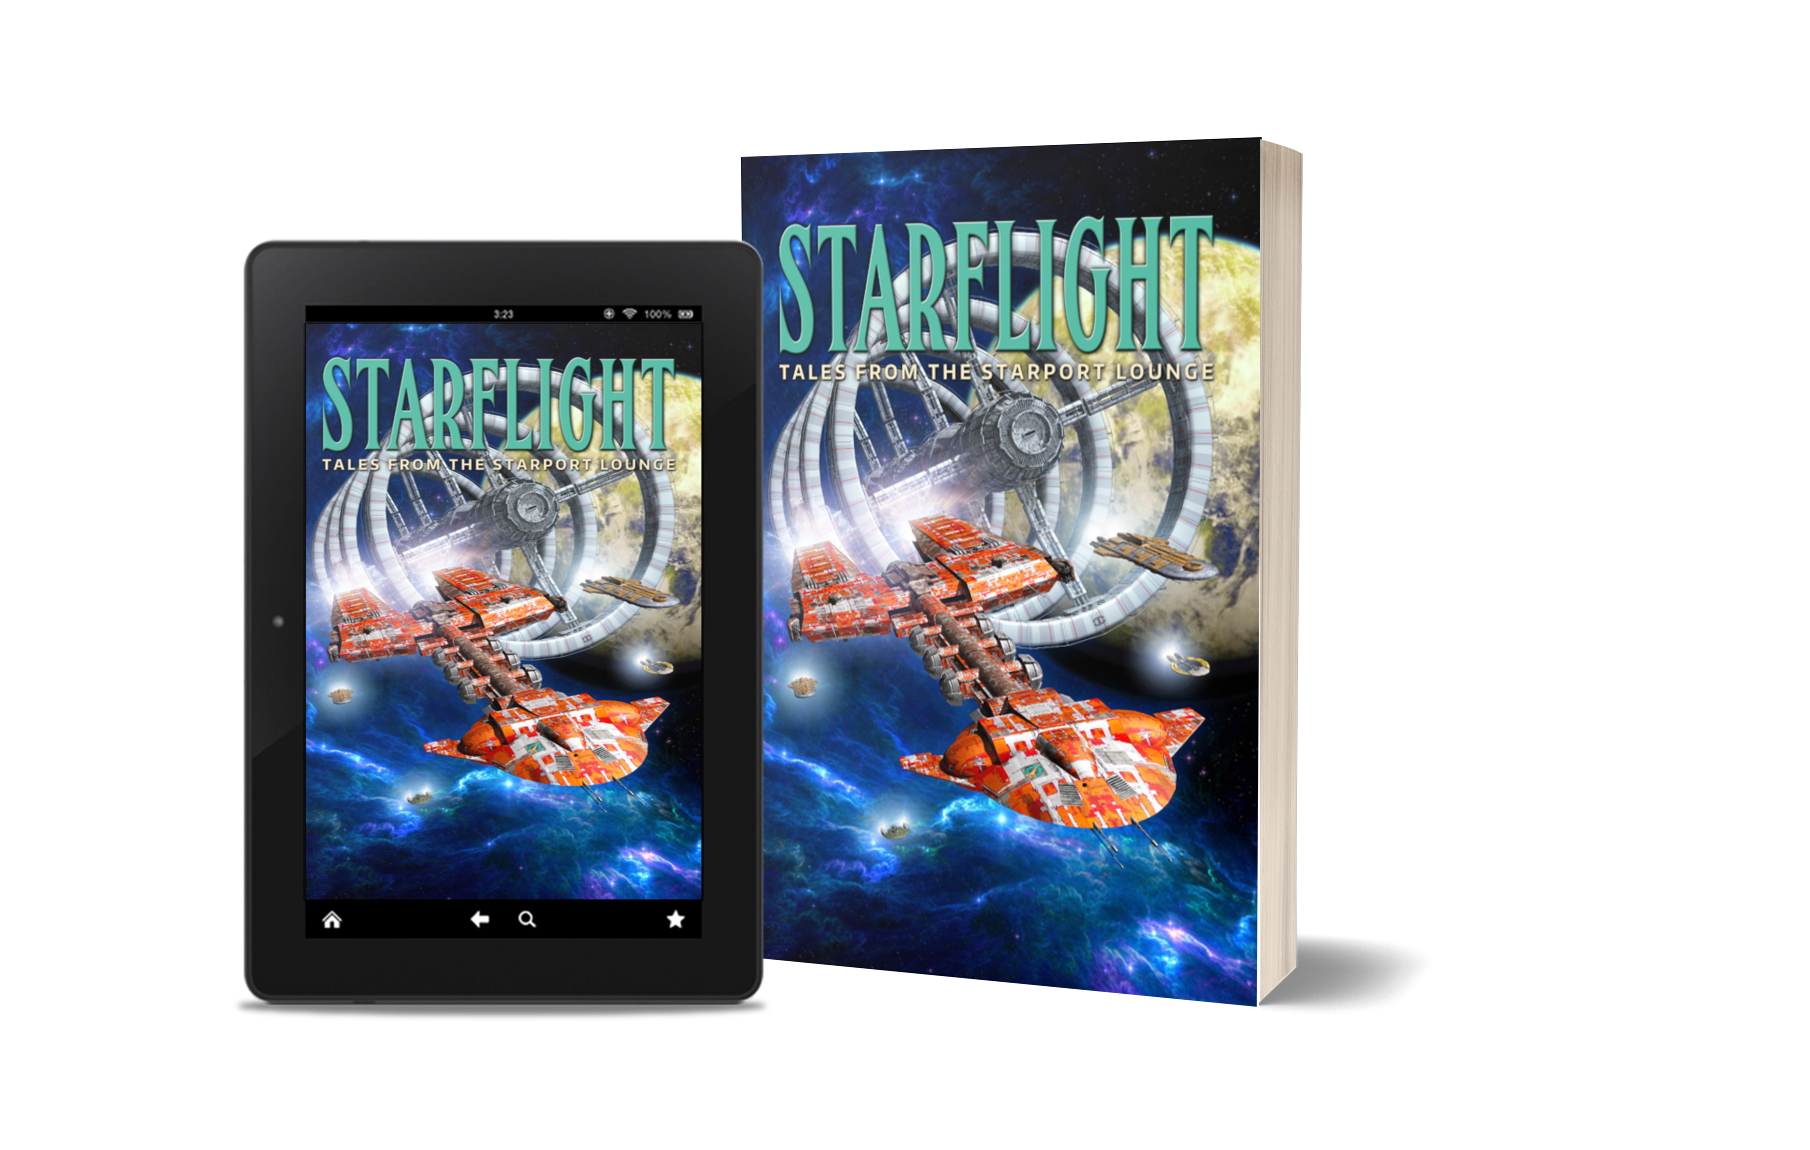 Are you ready for the next great Science Fiction series? Starflight: Tales from the Starport Lounge releases in two weeks! A collection of short stories based in the Starflight universe created by video game developer Greg Johnson!